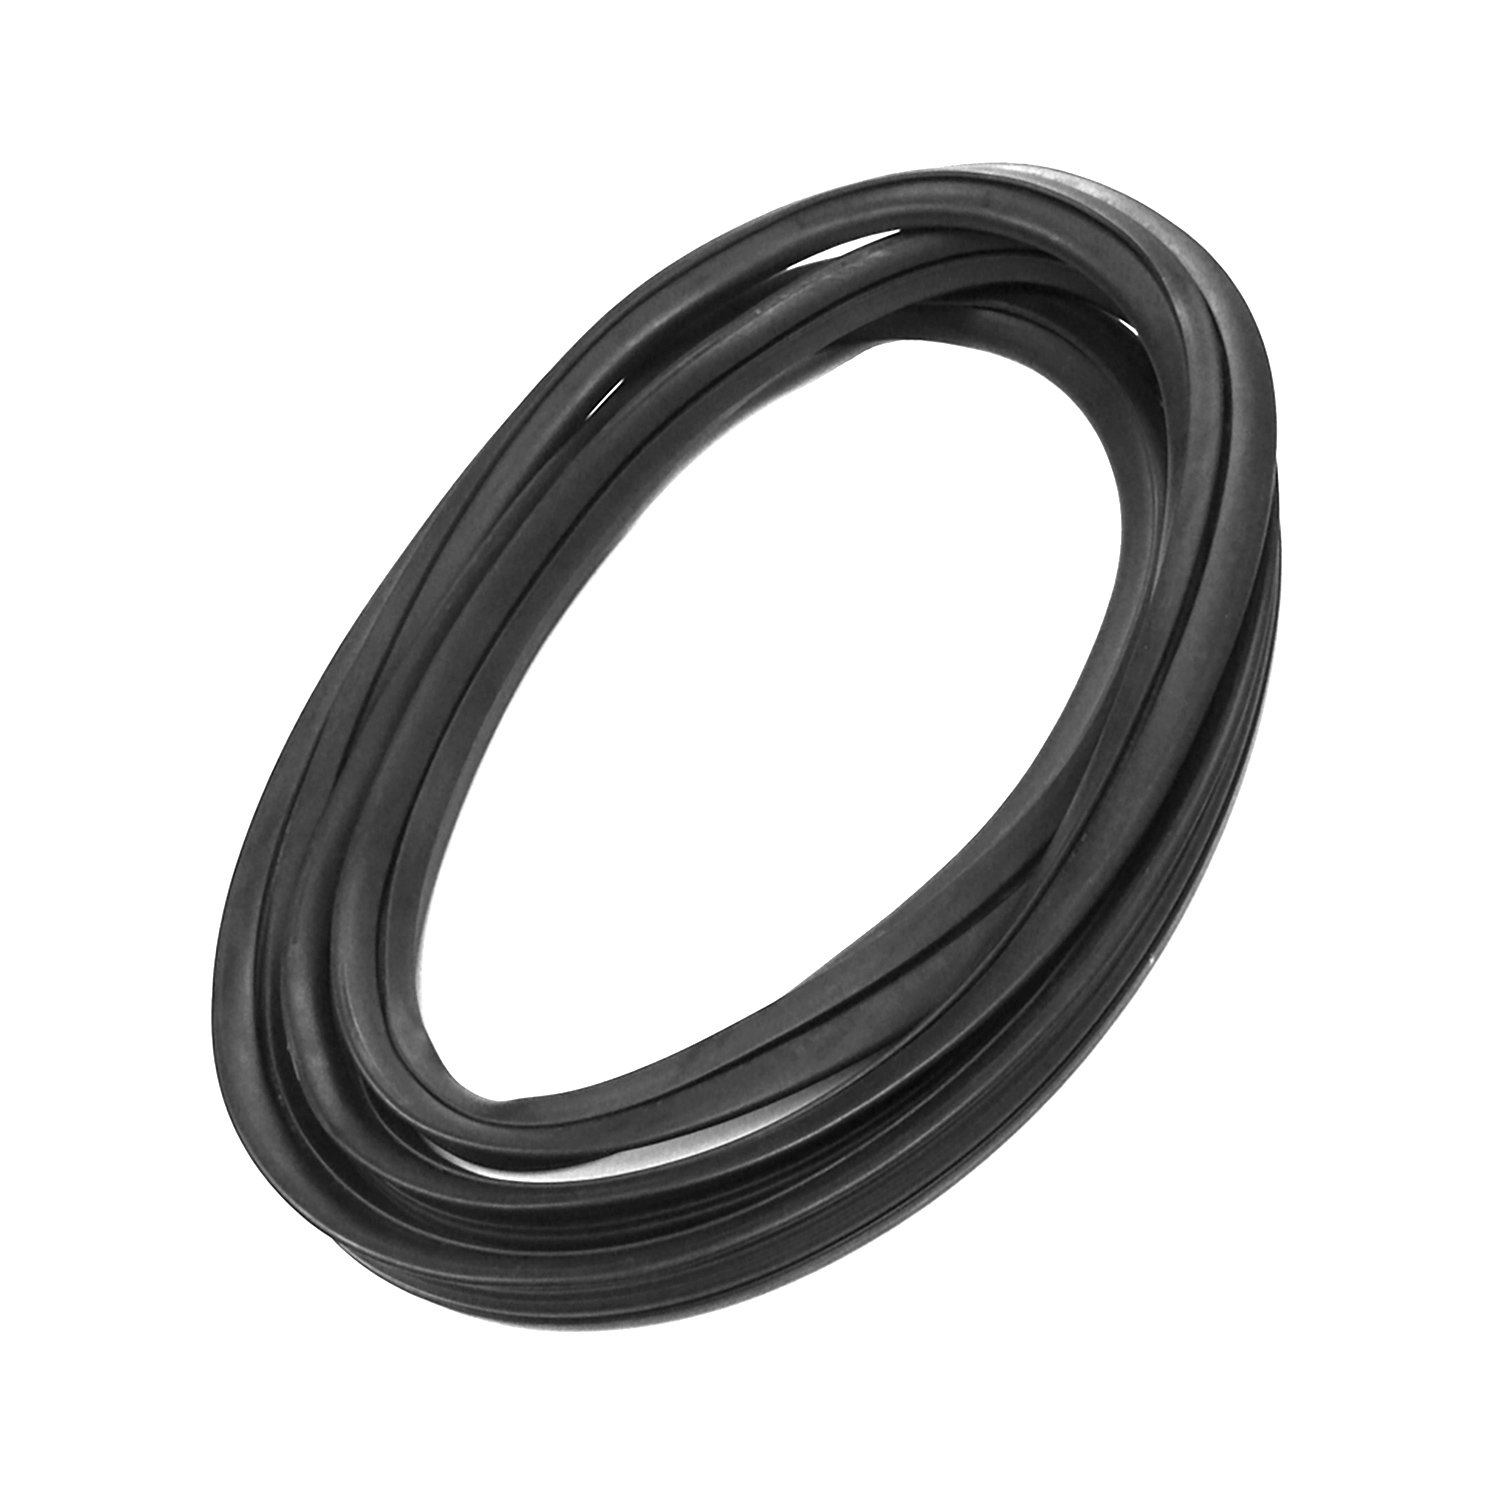 1980 Chevrolet G30 Windshield Seal, 71-80 GM Full Size Van With Trim Groove, Each-VWS 7324-A